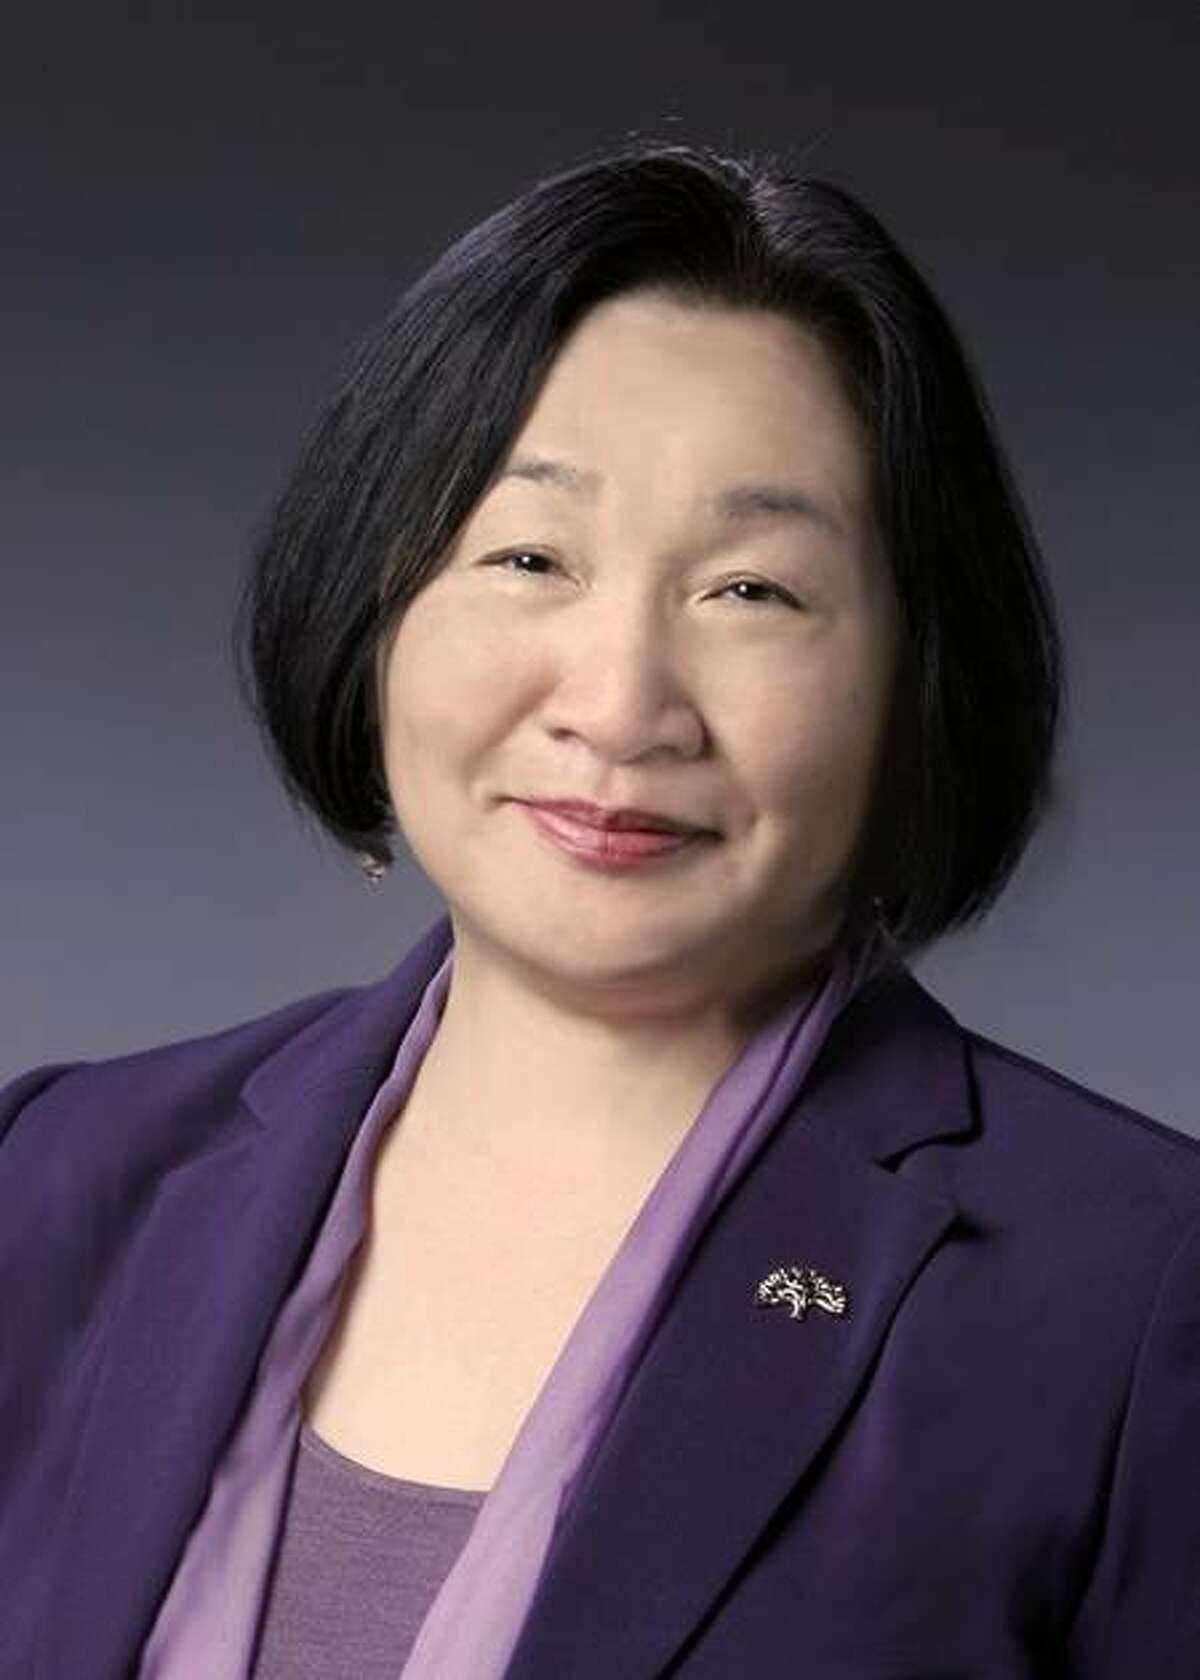 Jean Quan, Oakland City Councilwoman, is running for Oakland Mayor